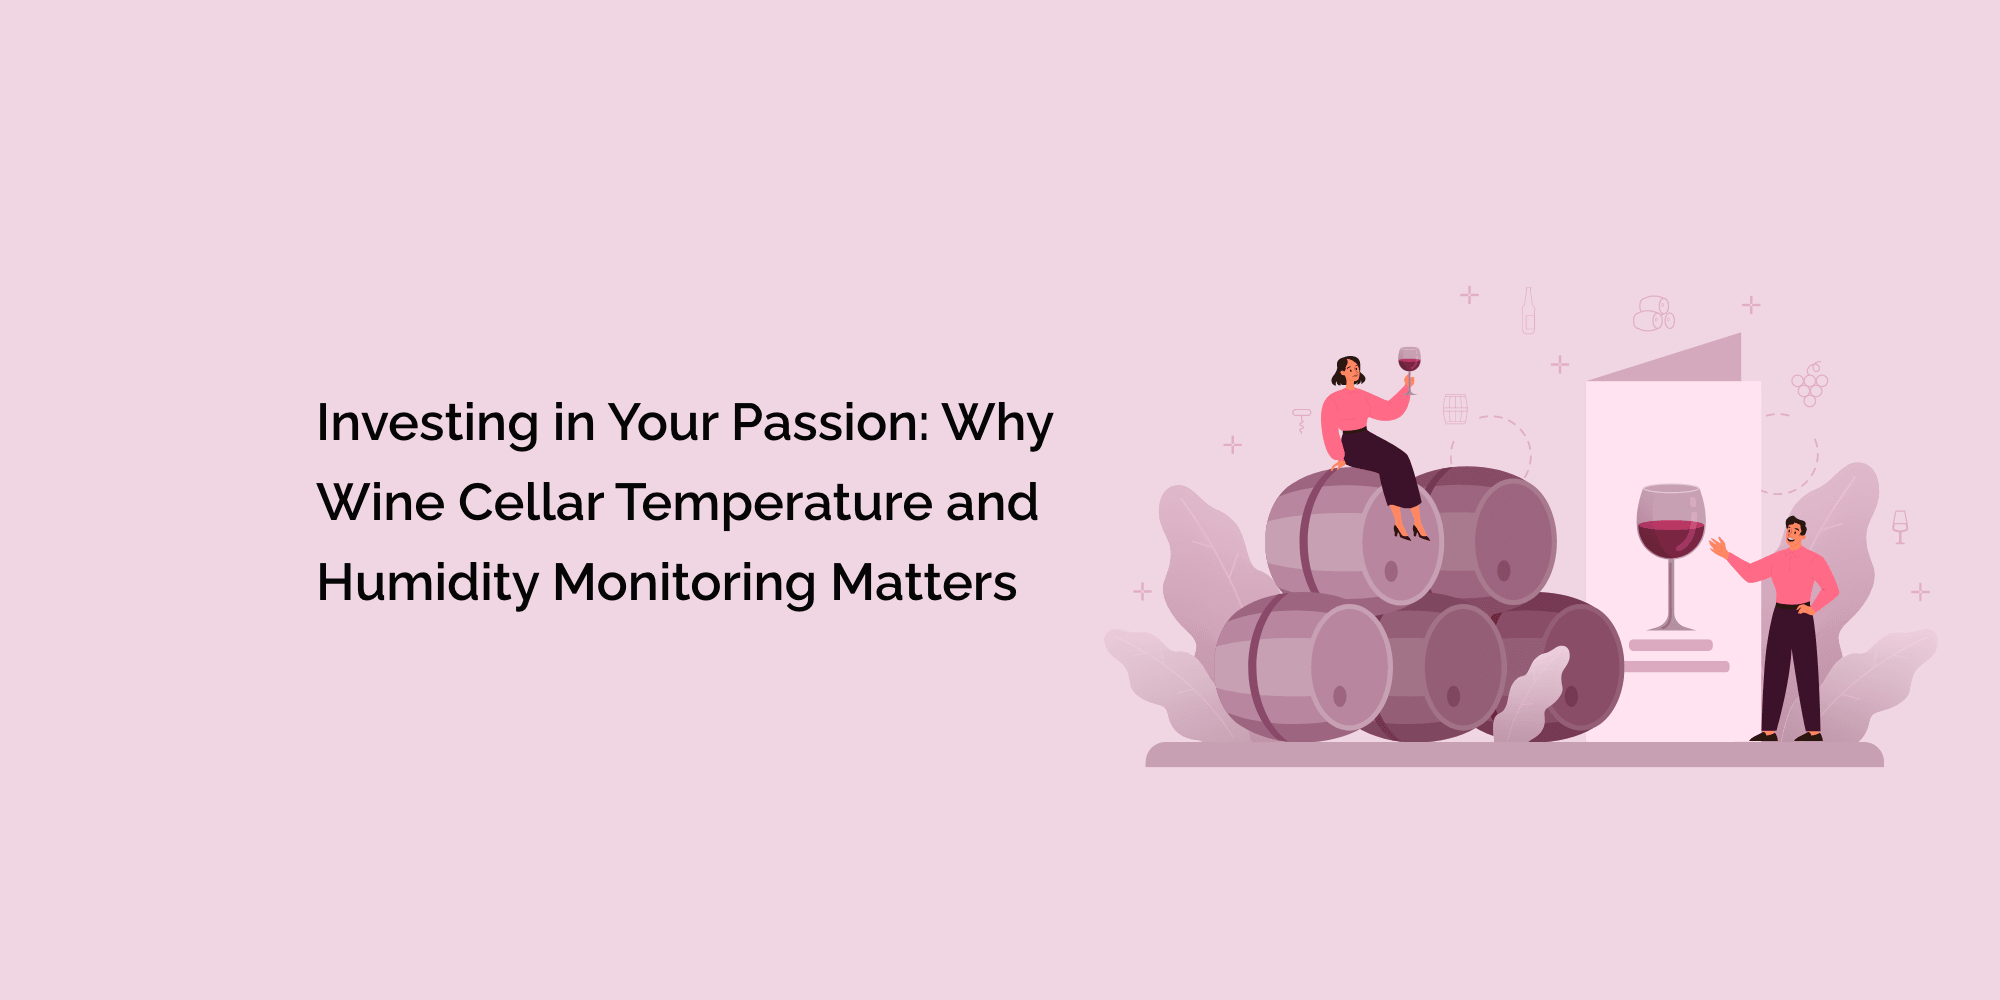 Investing in Your Passion: Why Wine Cellar Temperature and Humidity Monitoring Matters